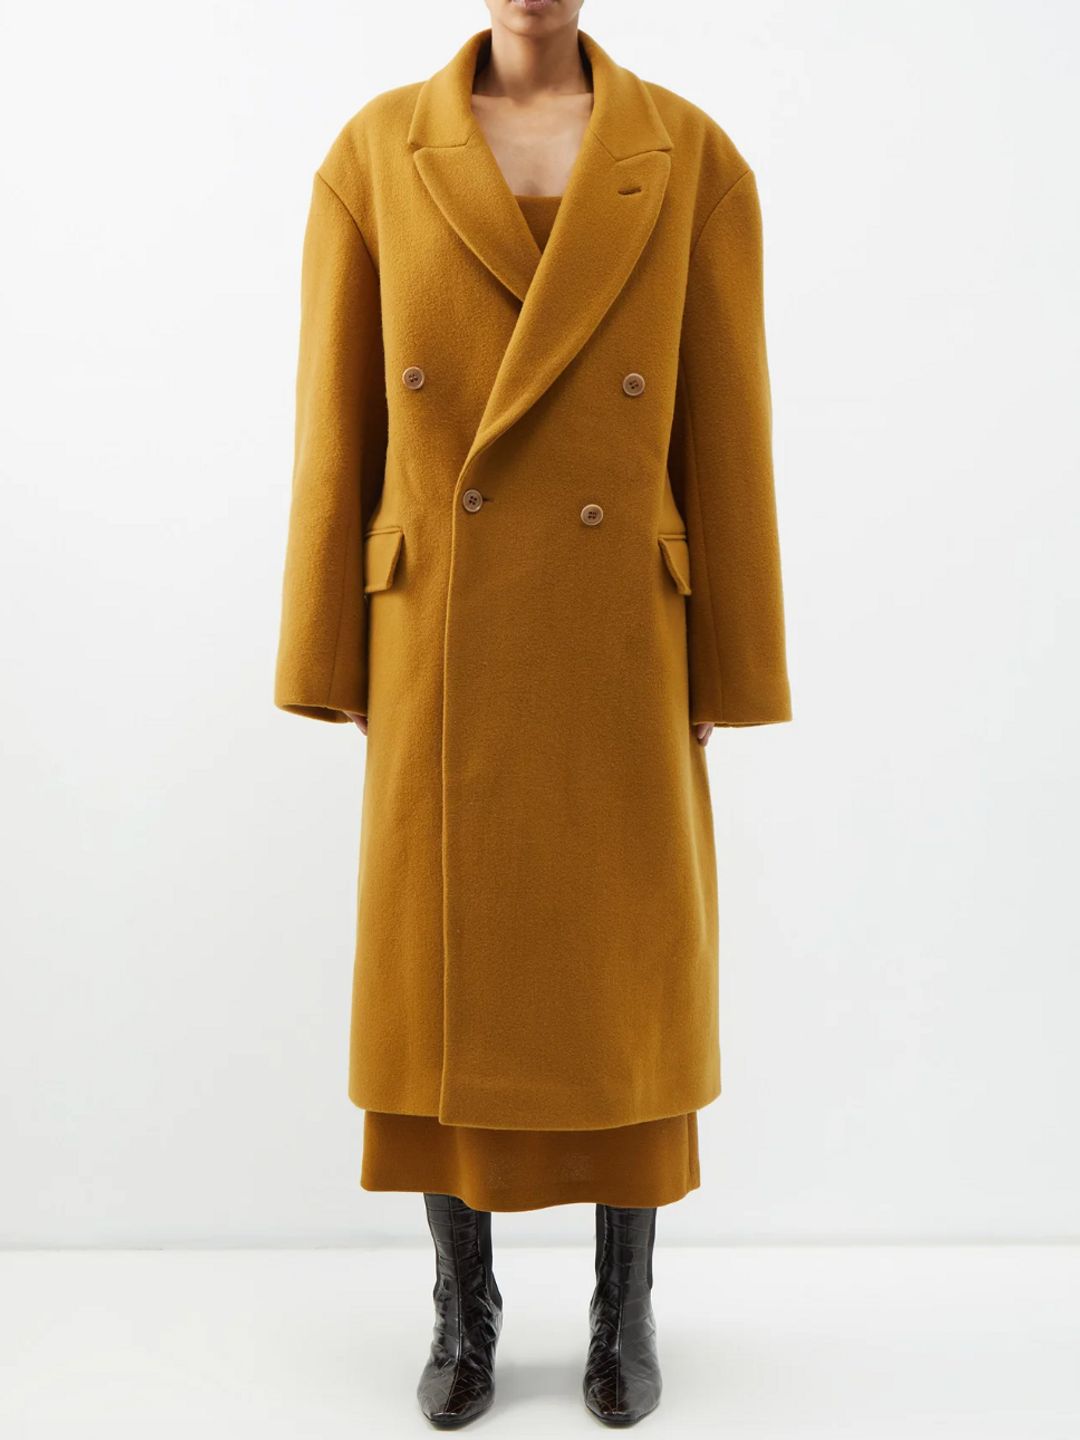 Responsible wool exaggerated shoulder overcoat